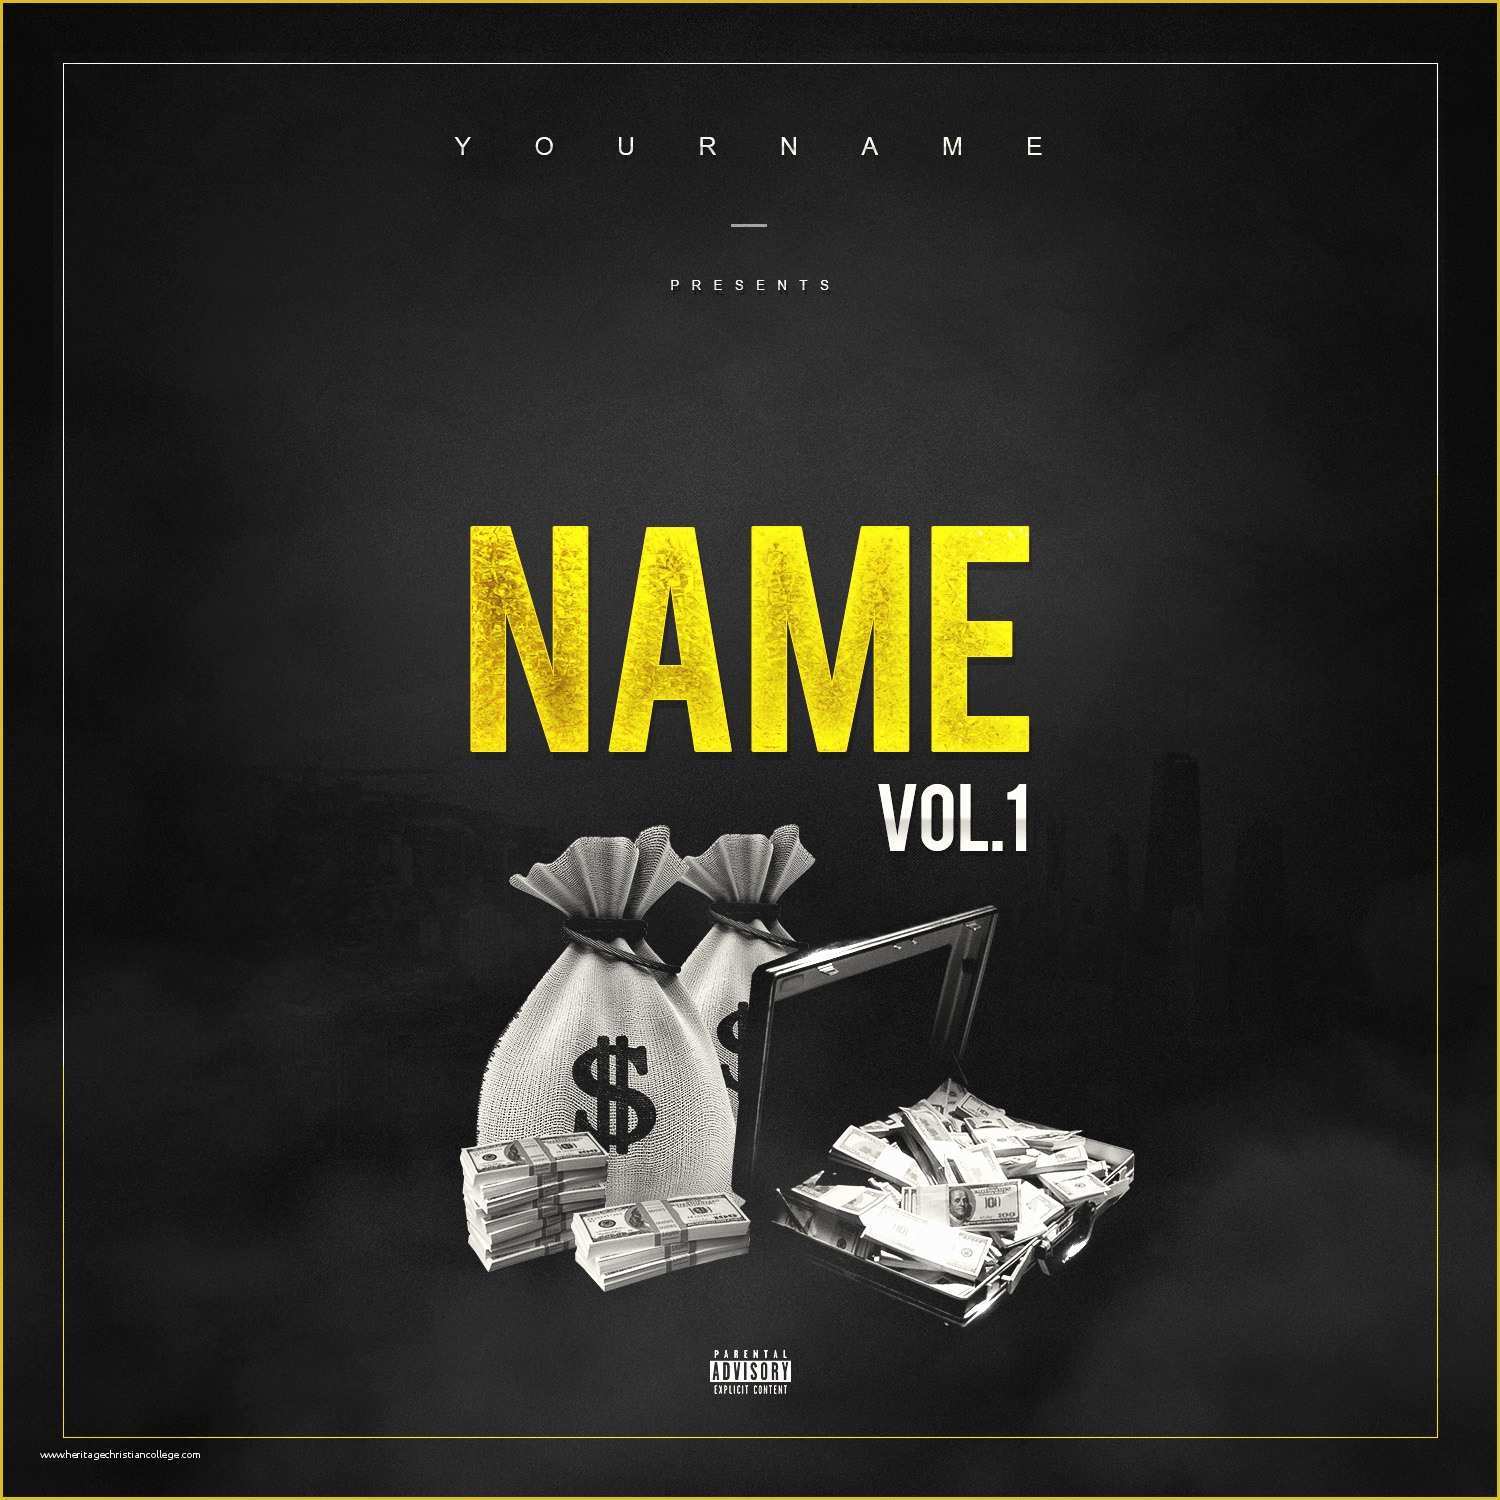 Free Mixtape Covers Templates Of Gold Money Premade Mixtape Cover Vms